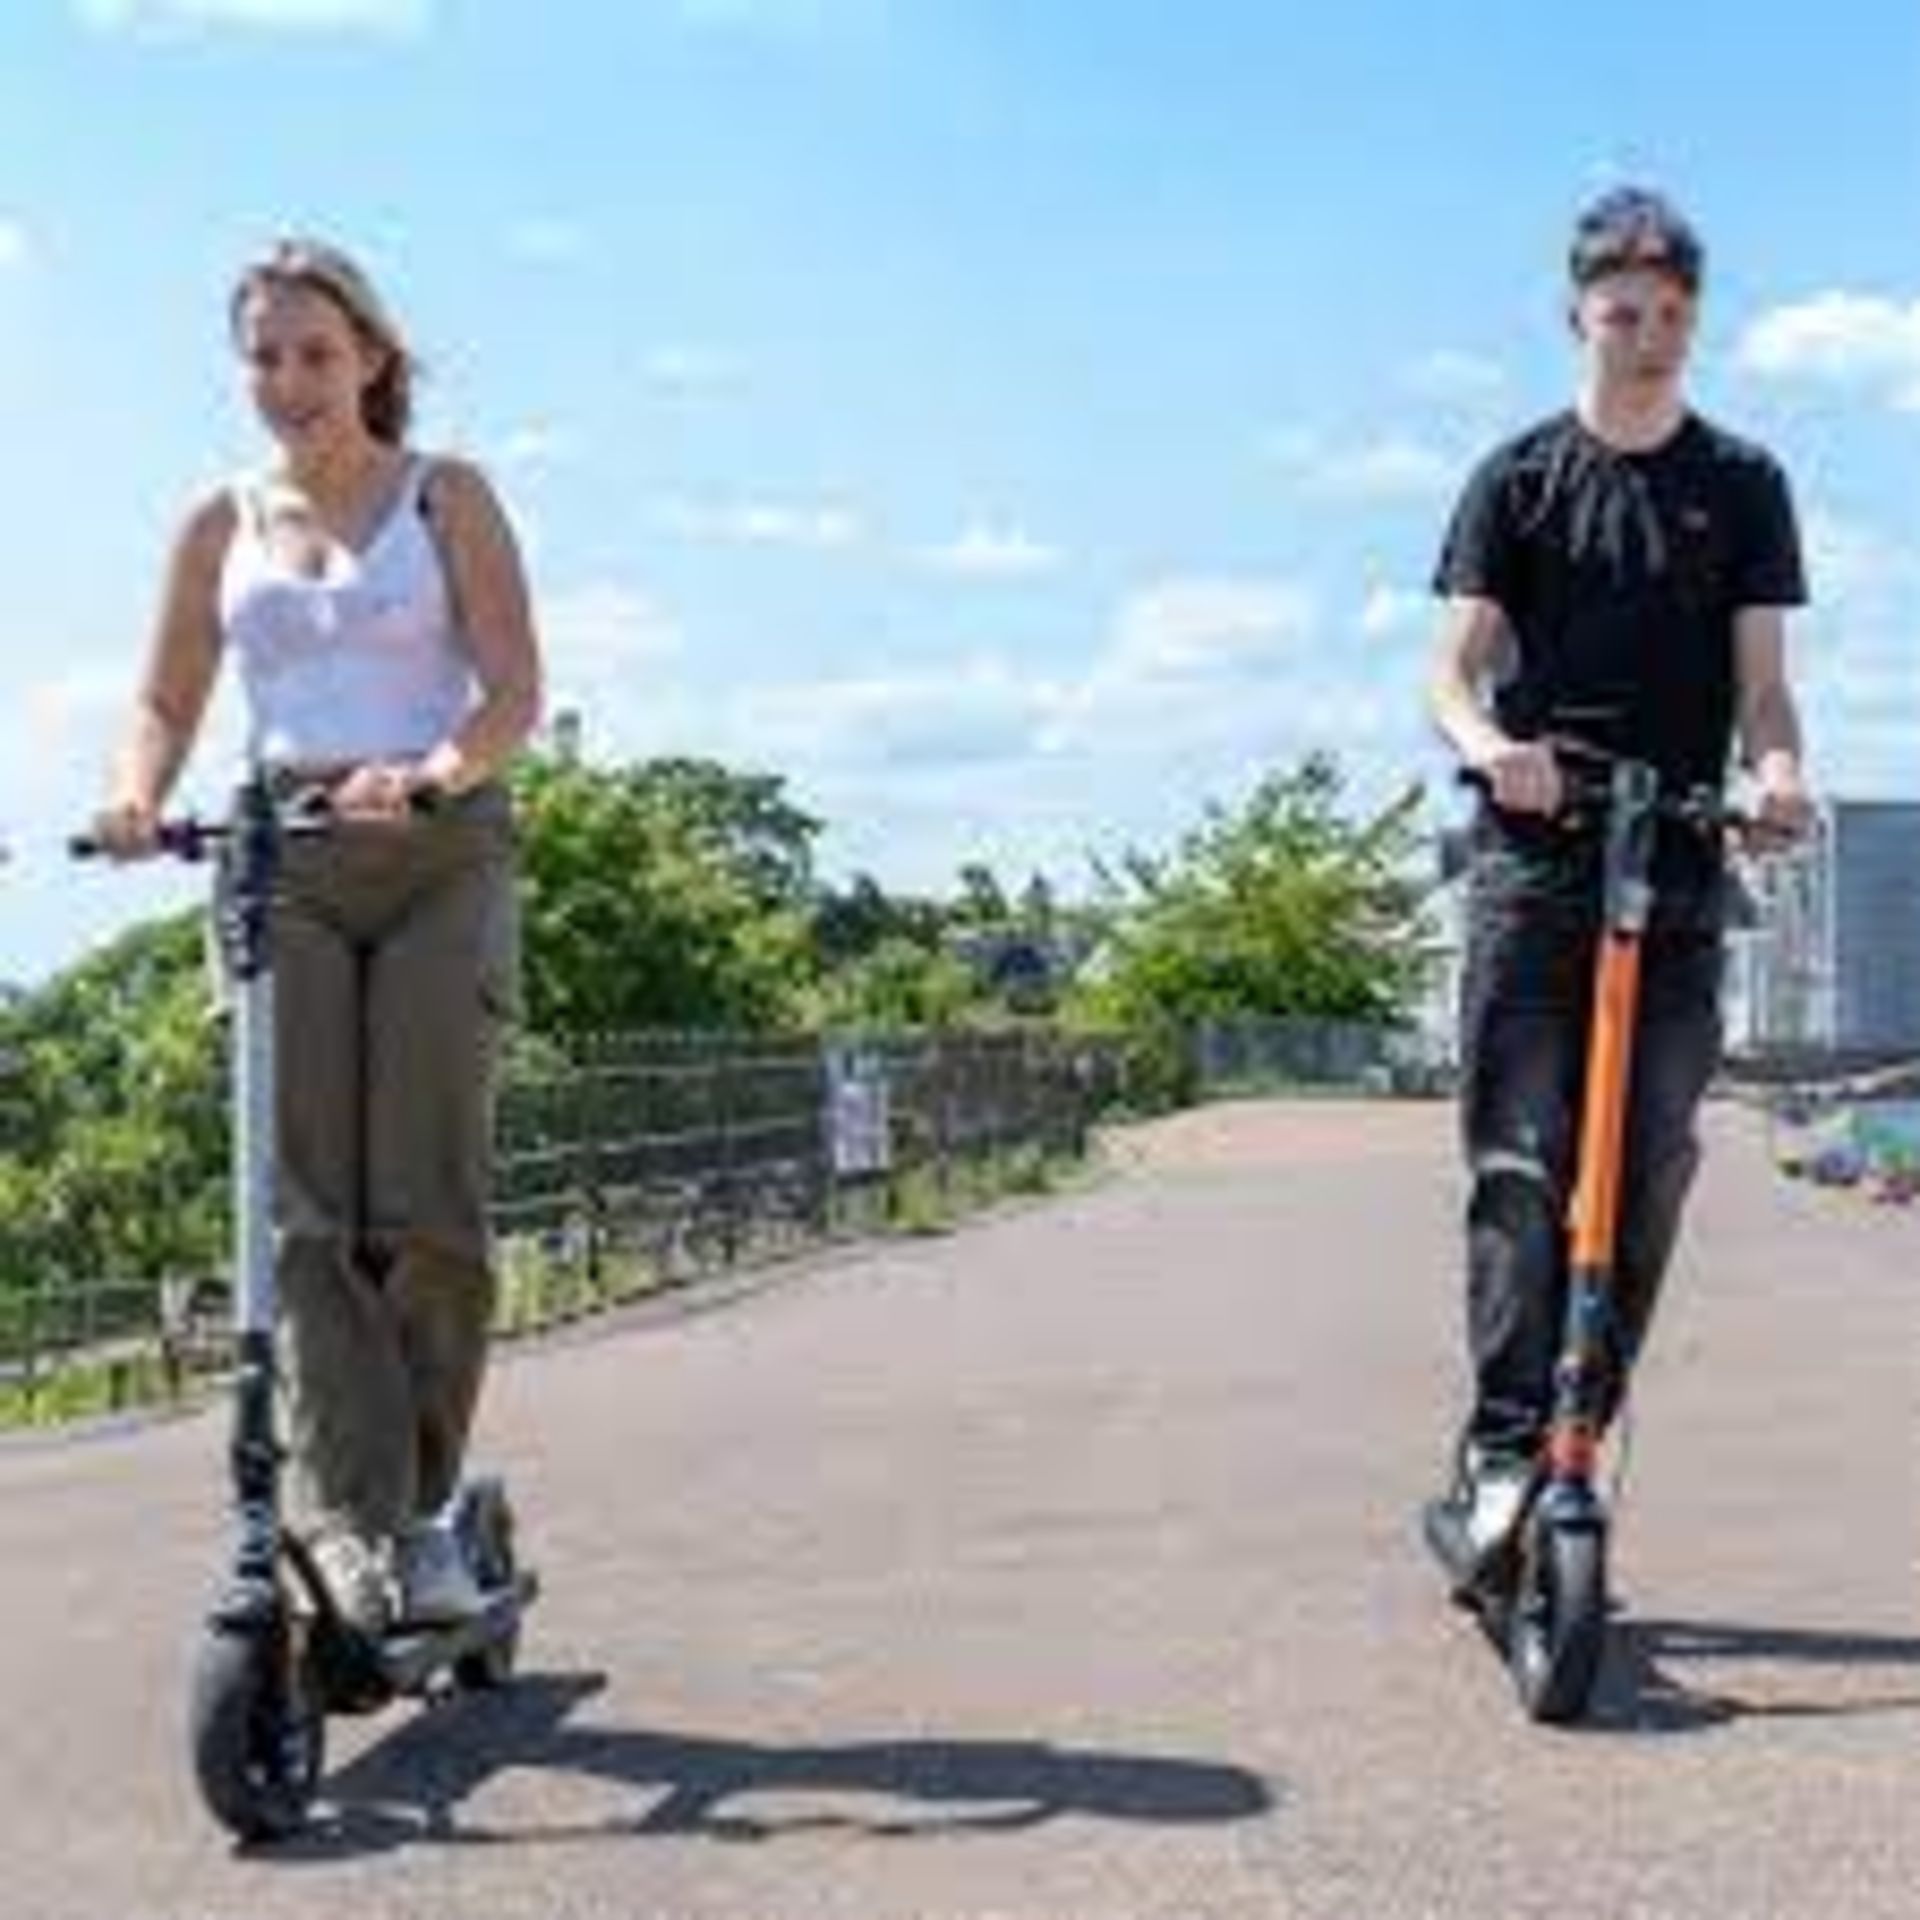 Brand New E-Glide V2 Electric Scooter Grey and Black RRP £599, Introducing a sleek and efficient - Image 2 of 3